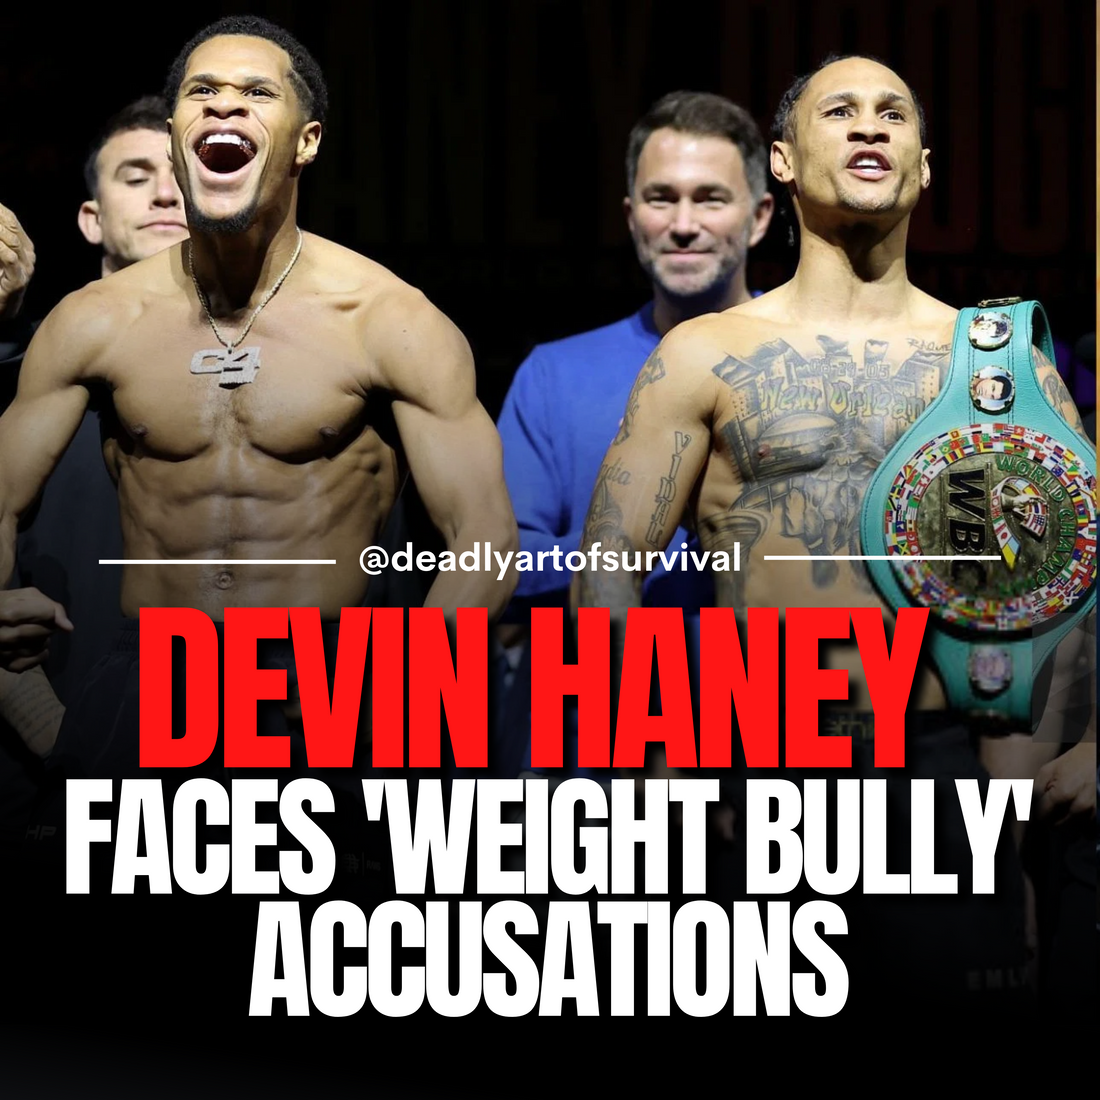 Devin-Haney-Faces-Accusations-of-Being-a-Weight-Bully. deadlyartofsurvival.com